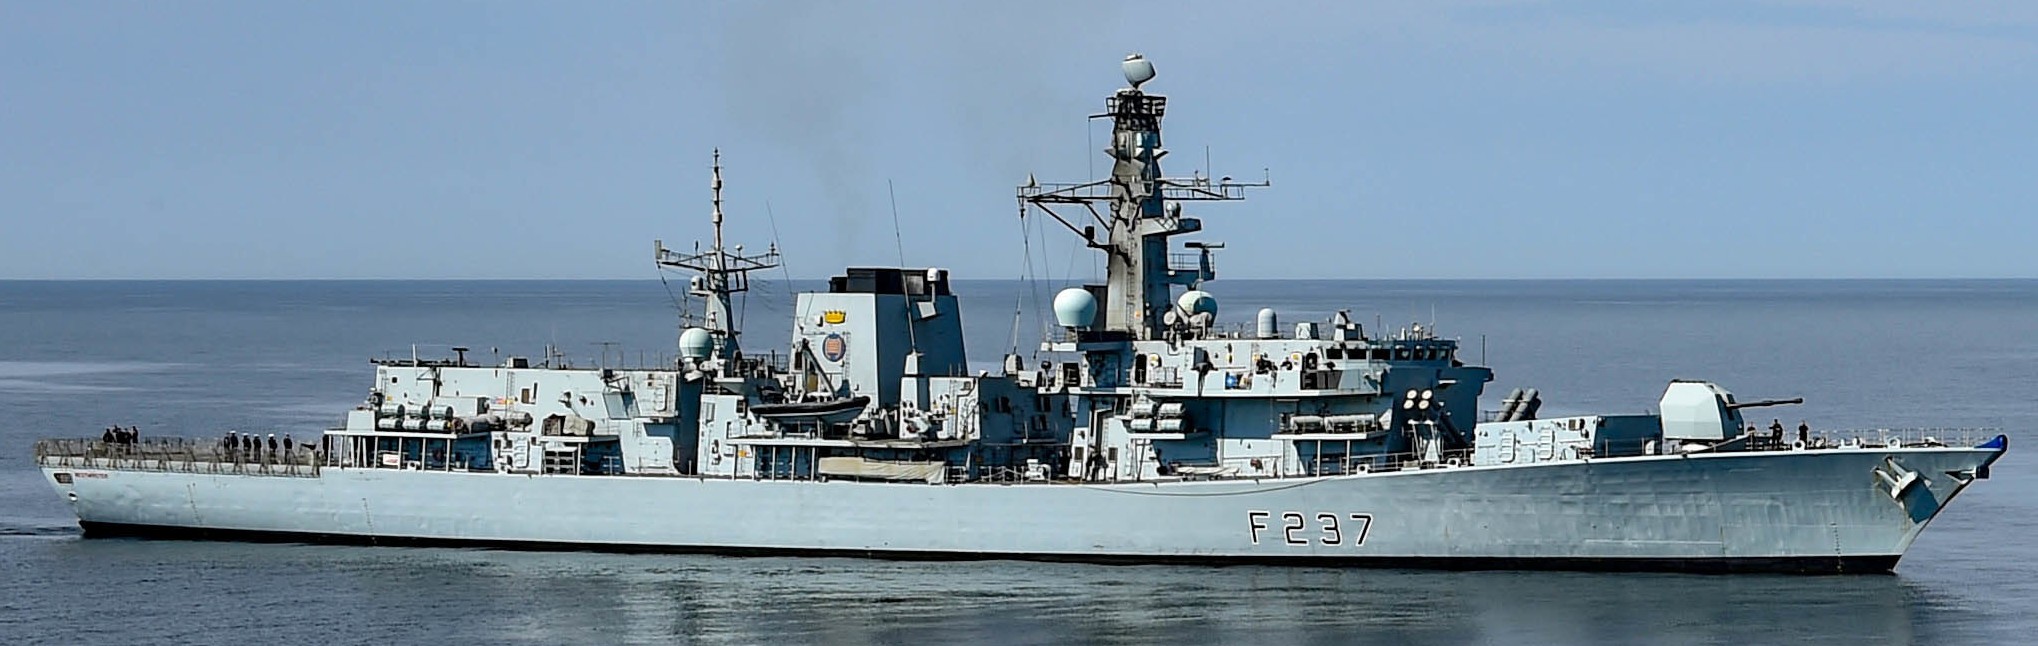 f-237 hms westminster type 23 duke class guided missile frigate ffg royal navy 28